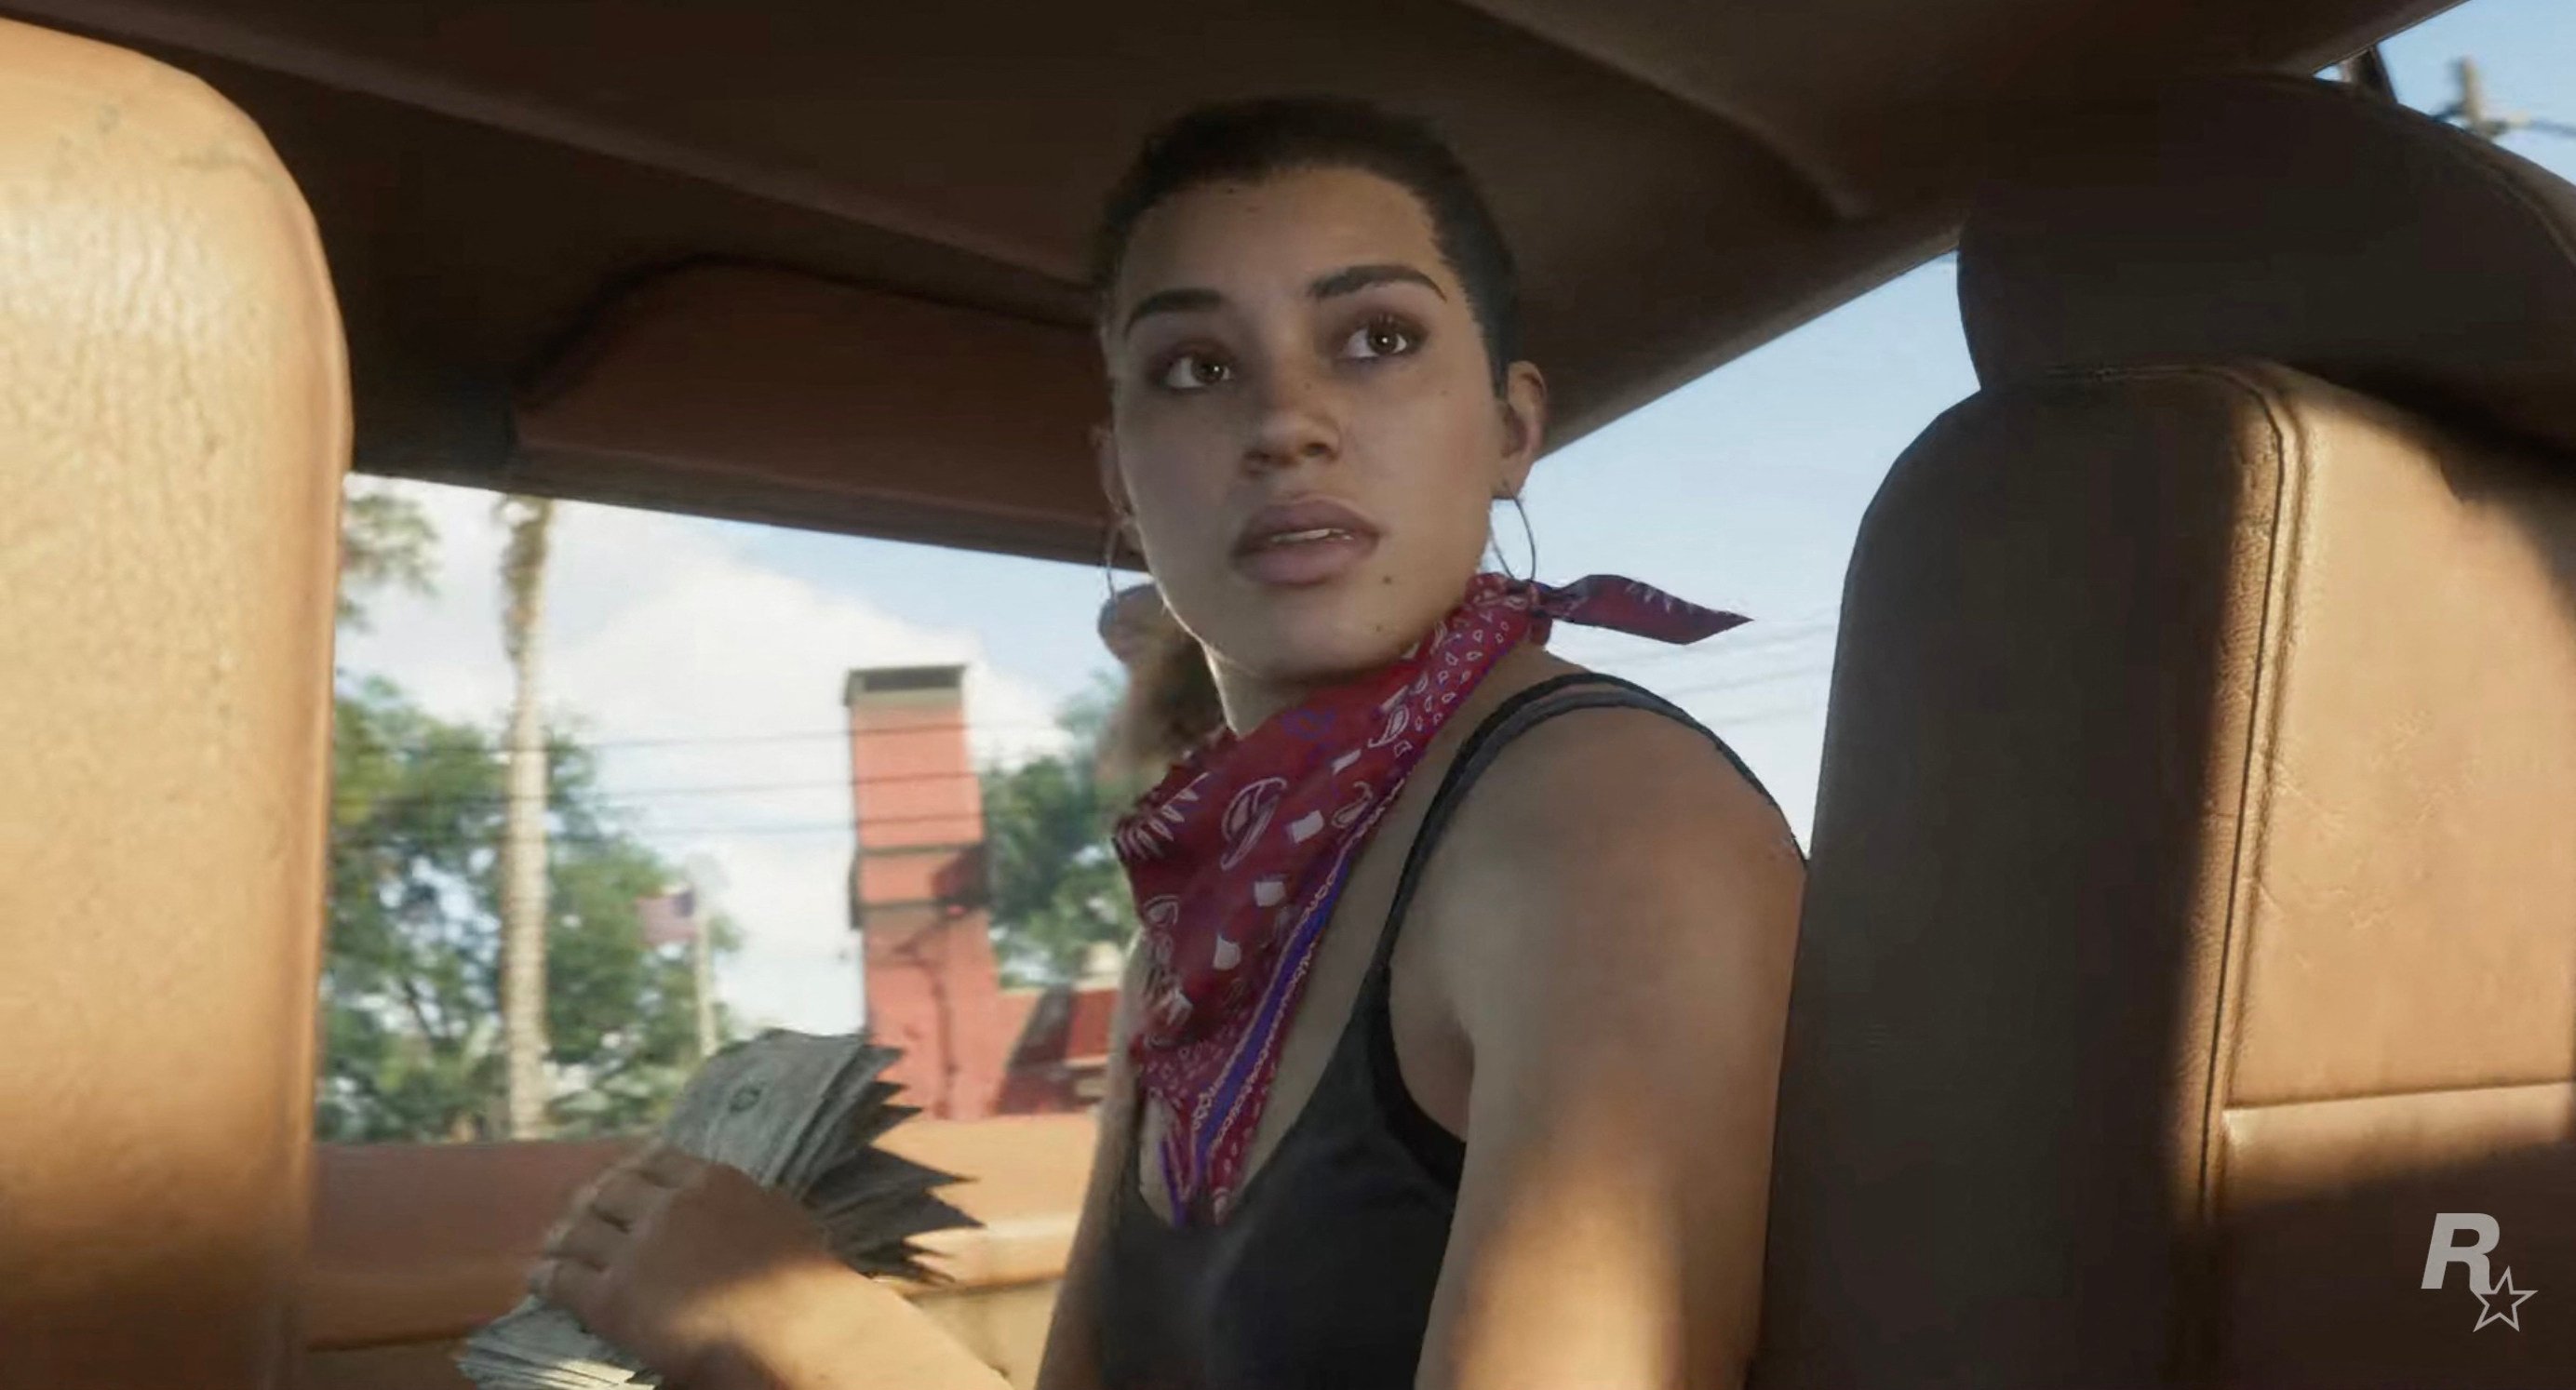 “Lucia” is seen in this still from the trailer for Grand Theft Auto 6, which Rockstar Games will release in 2025. The first playable woman character in the series, she represents a growing focus on diversity and inclusion in video gaming. Photo: AFP